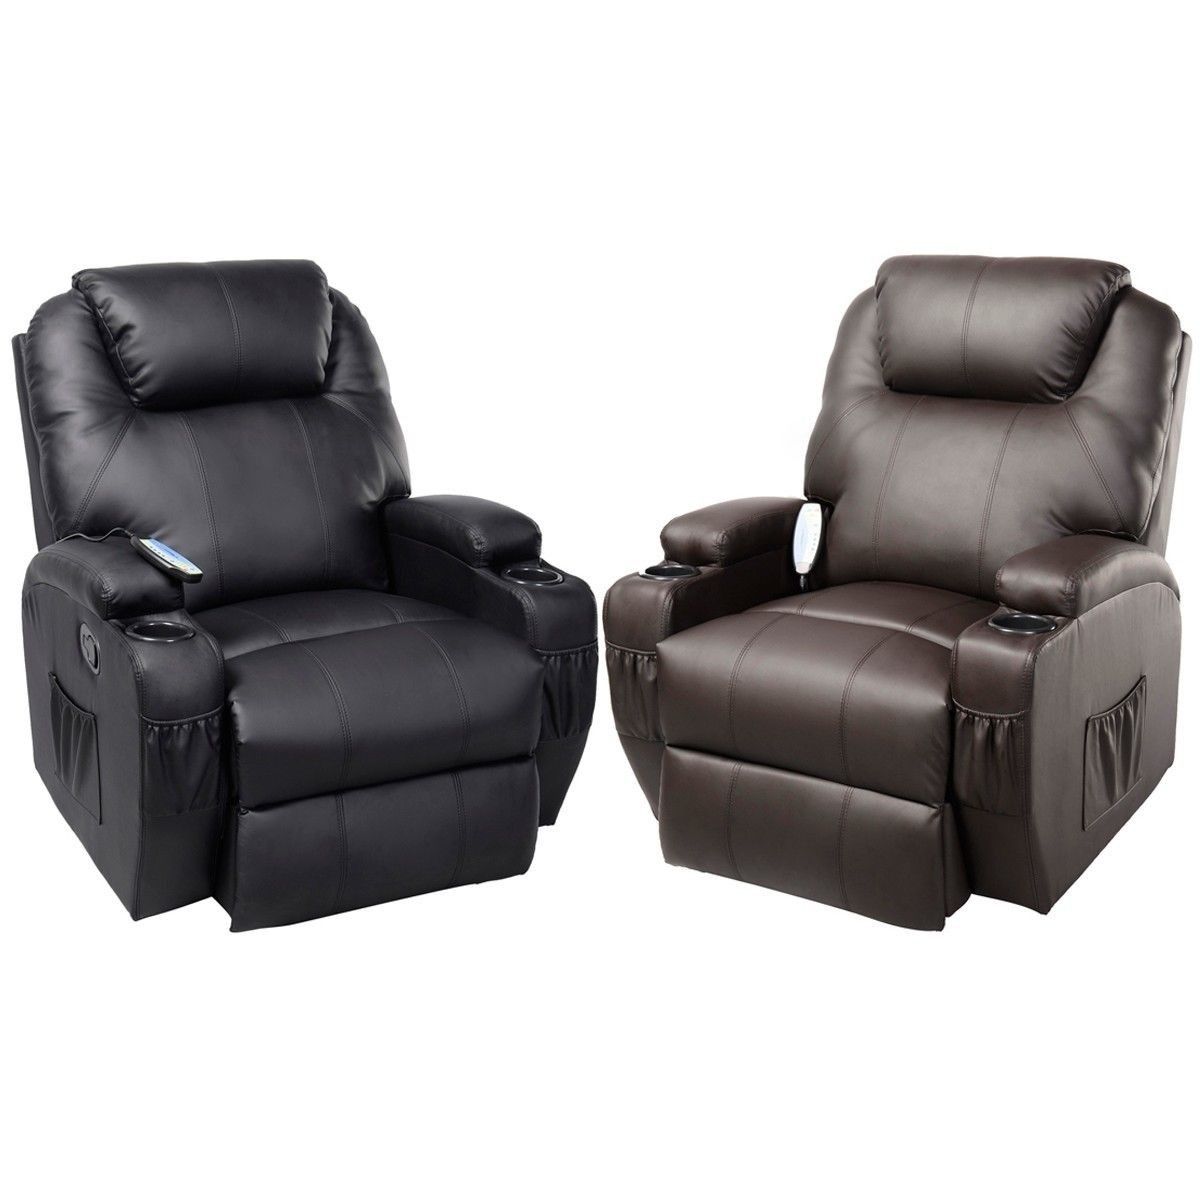 Ergonomic Heated Massage Recliner Sofa Chair Deluxe Lounge In Recliner Sofa Chairs (View 1 of 15)